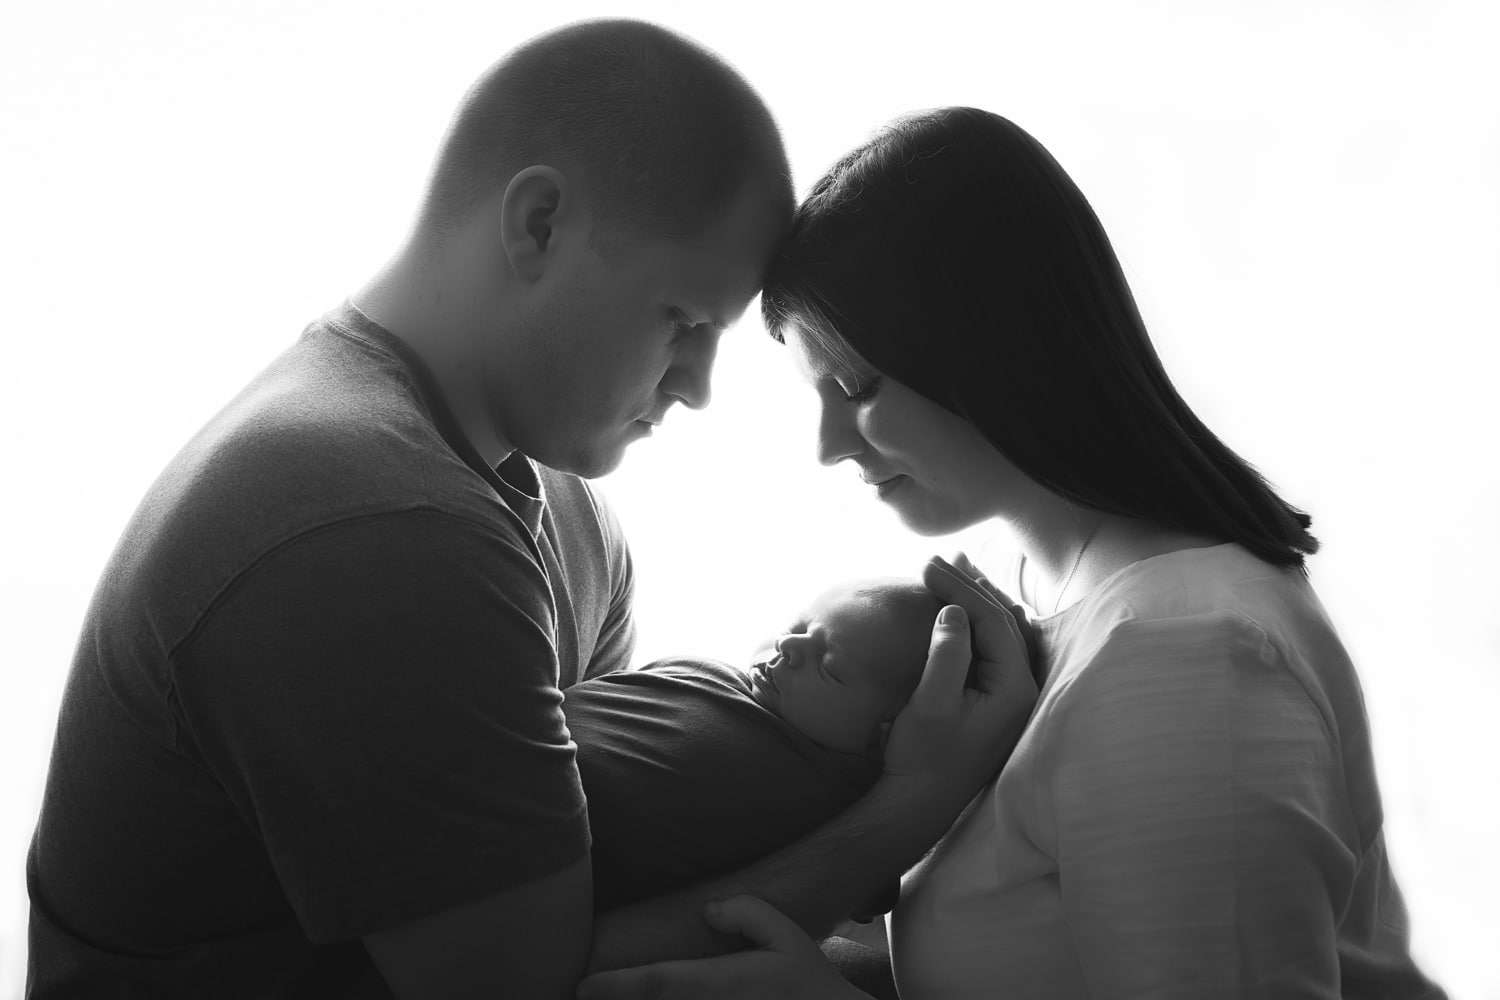 newborn photographer in rochester ny captures newborn baby boy in his parents arms